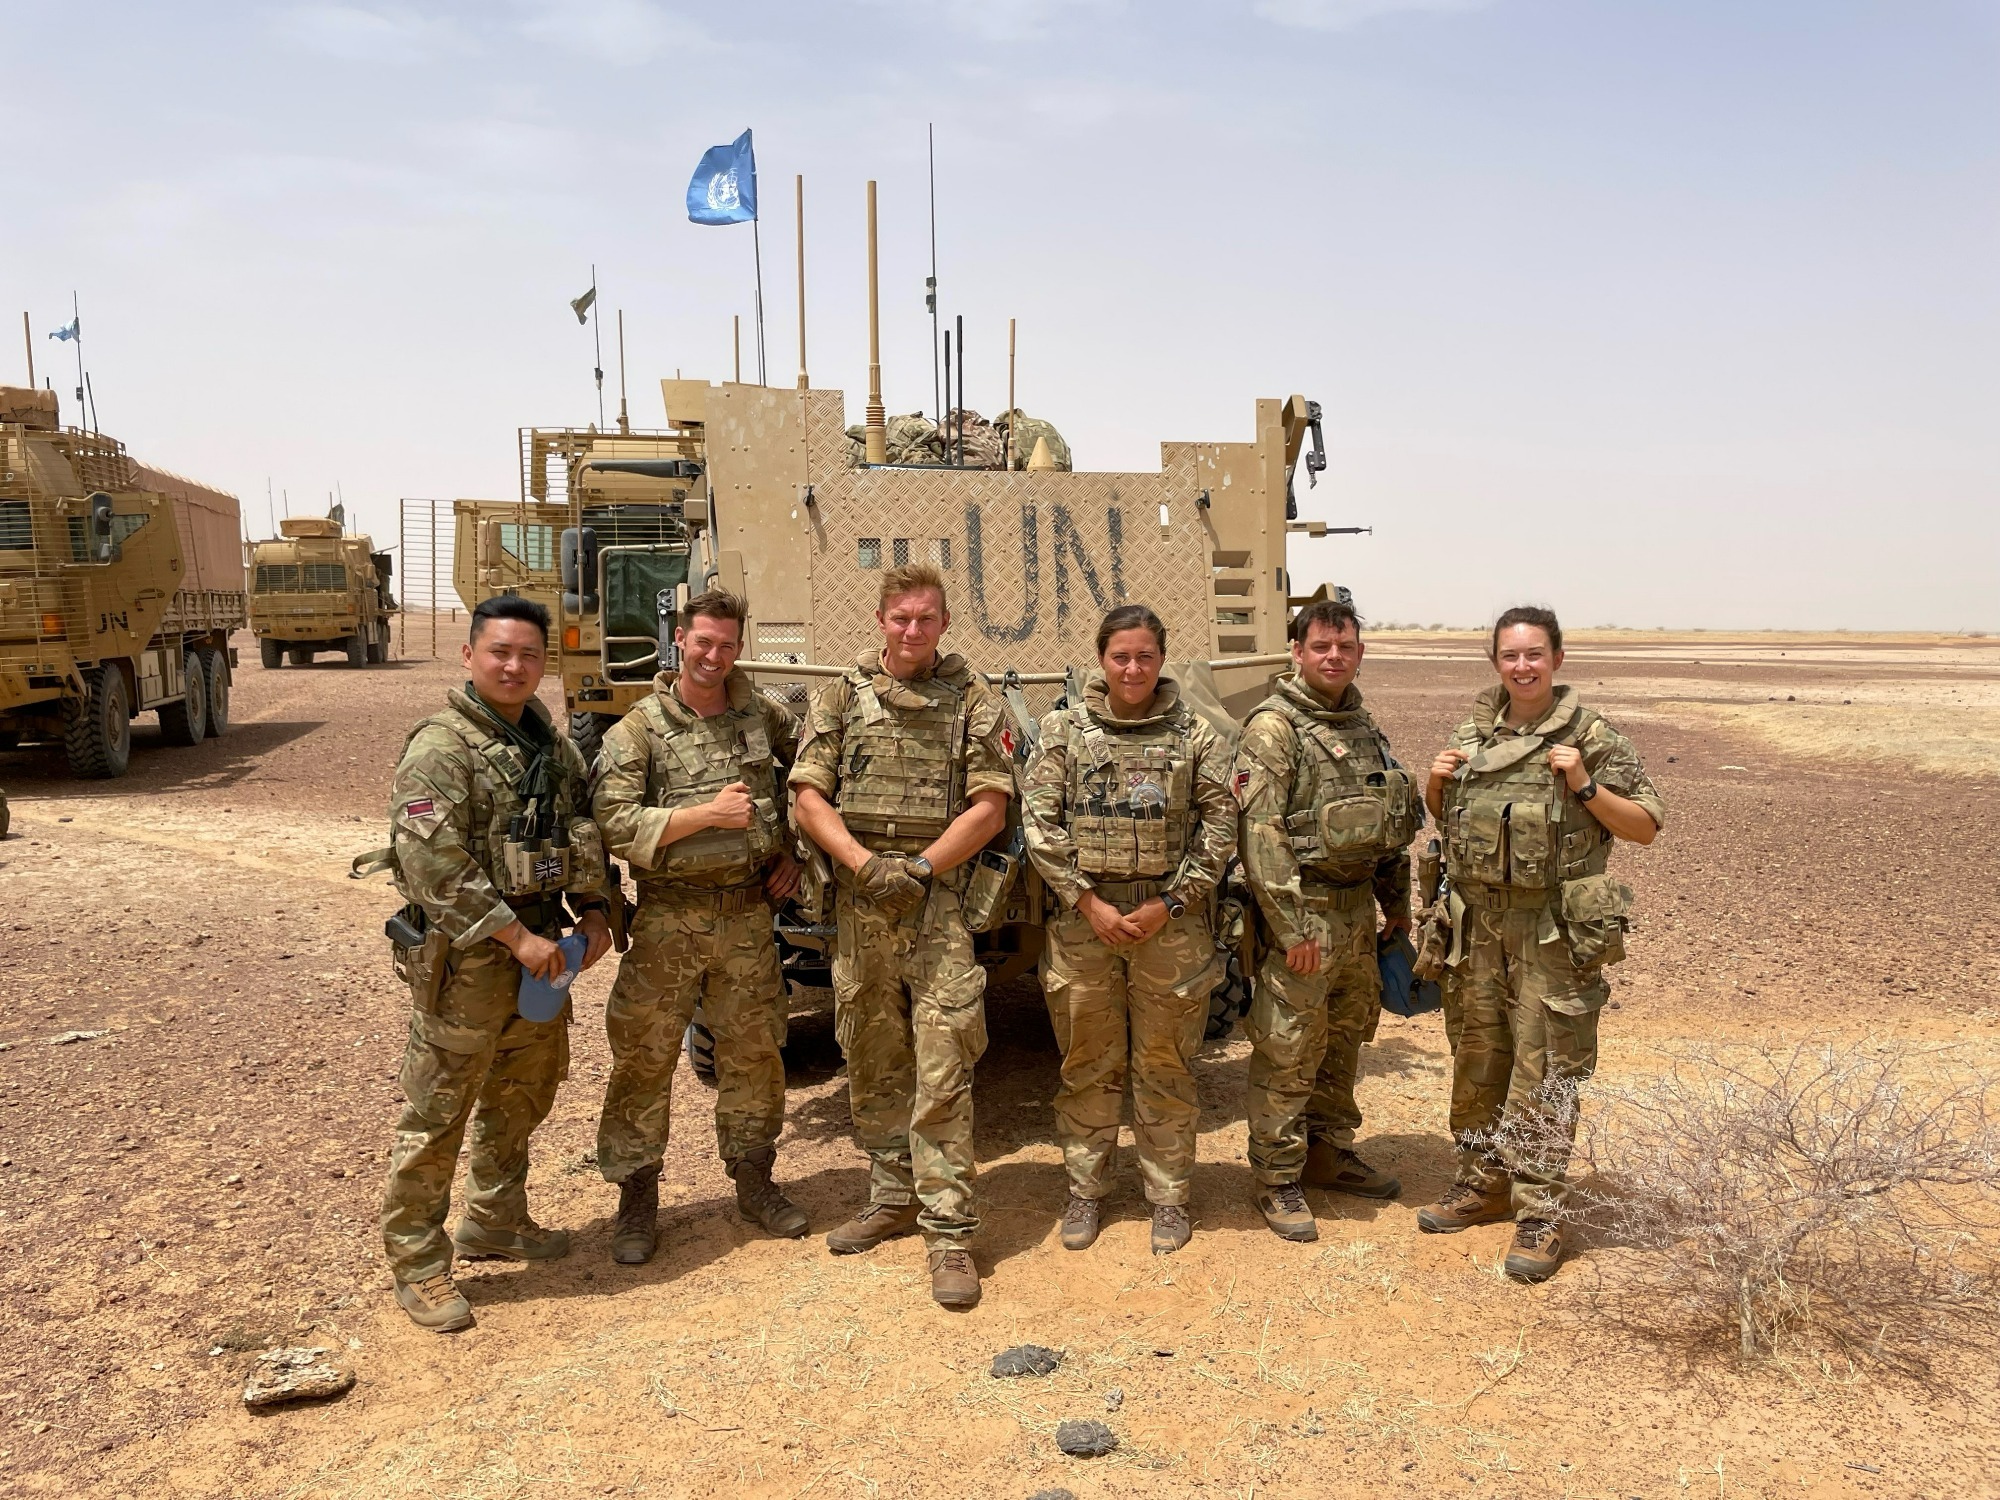 QARANC nurses and HCA’s deployed on forward operations delivering care wherever it is required. 
(L-R): Cpl Gurung, Sgt Barter, SSgt Nolan, Sgt Boswell, SSgt Blythe & Capt Hobbs